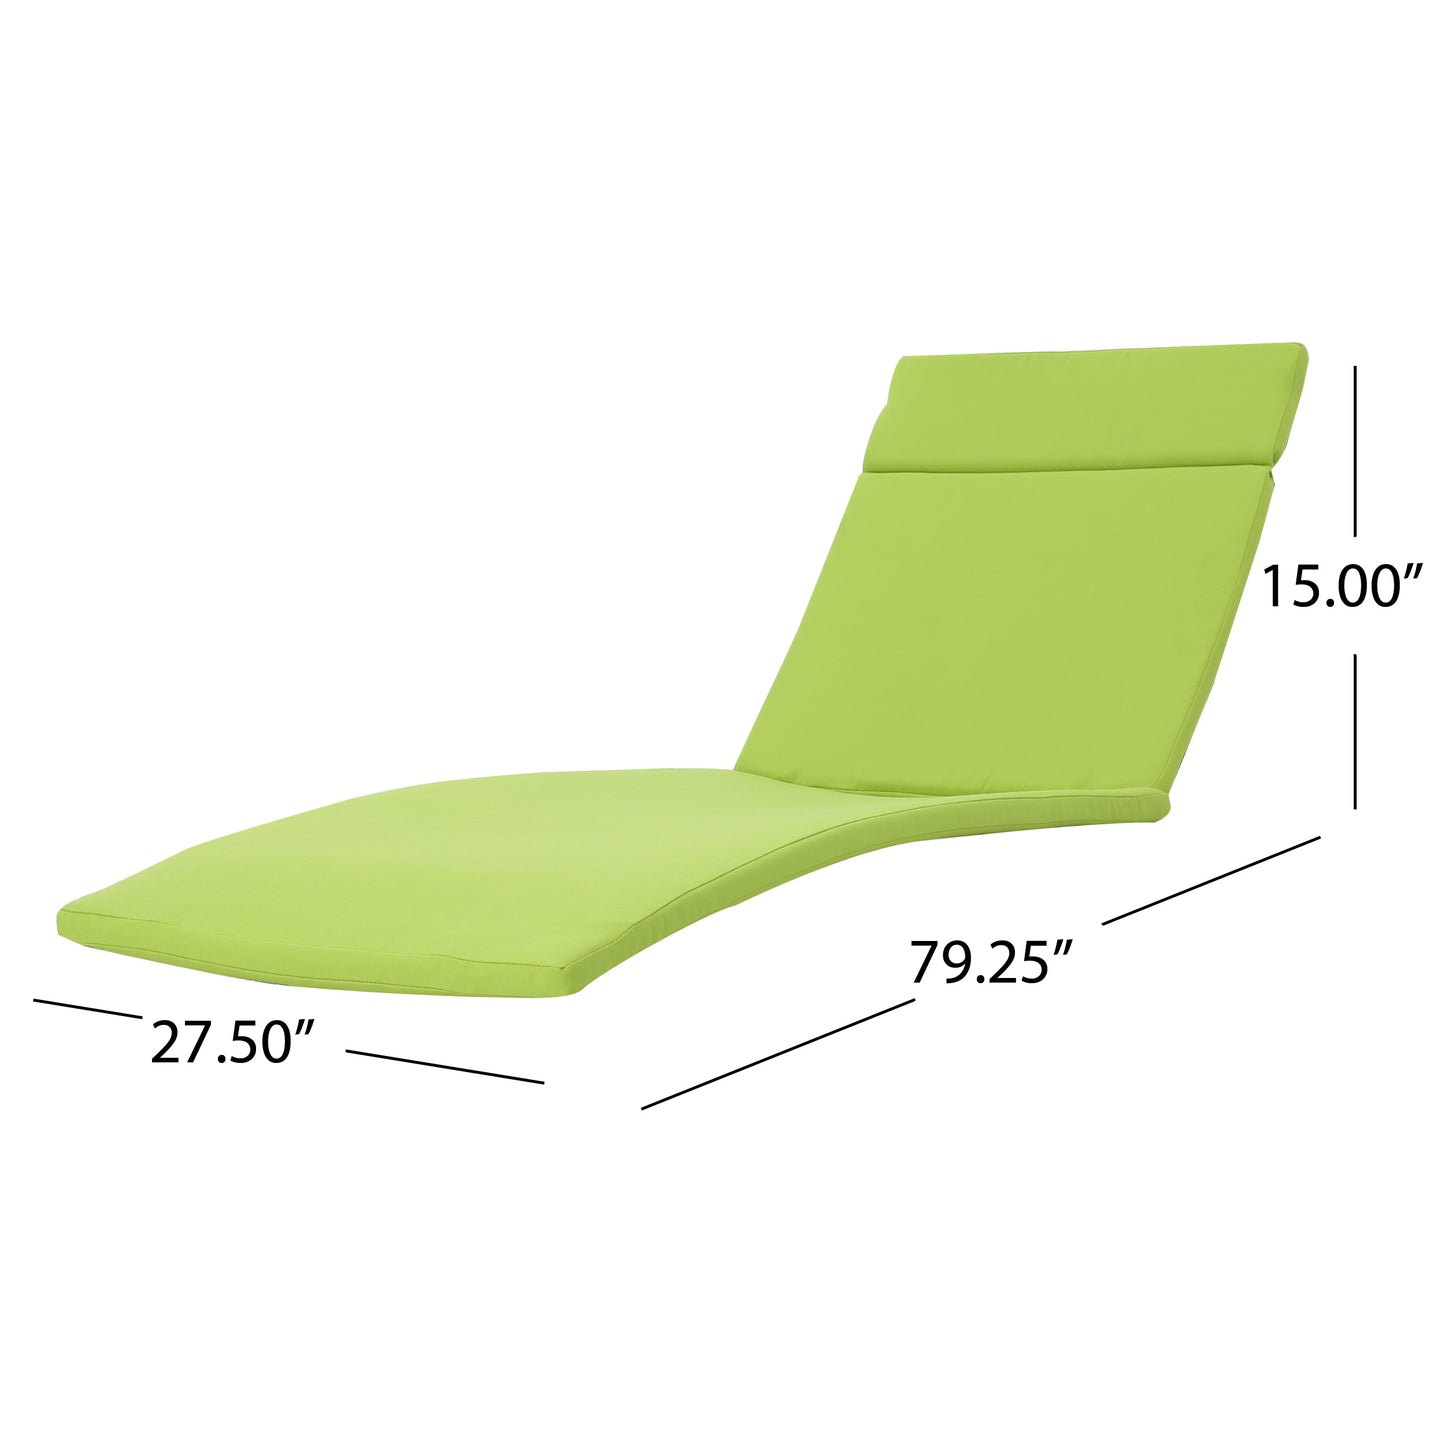 Lakeport Outdoor 3pc Adjustable Chaise Lounge Chair Set